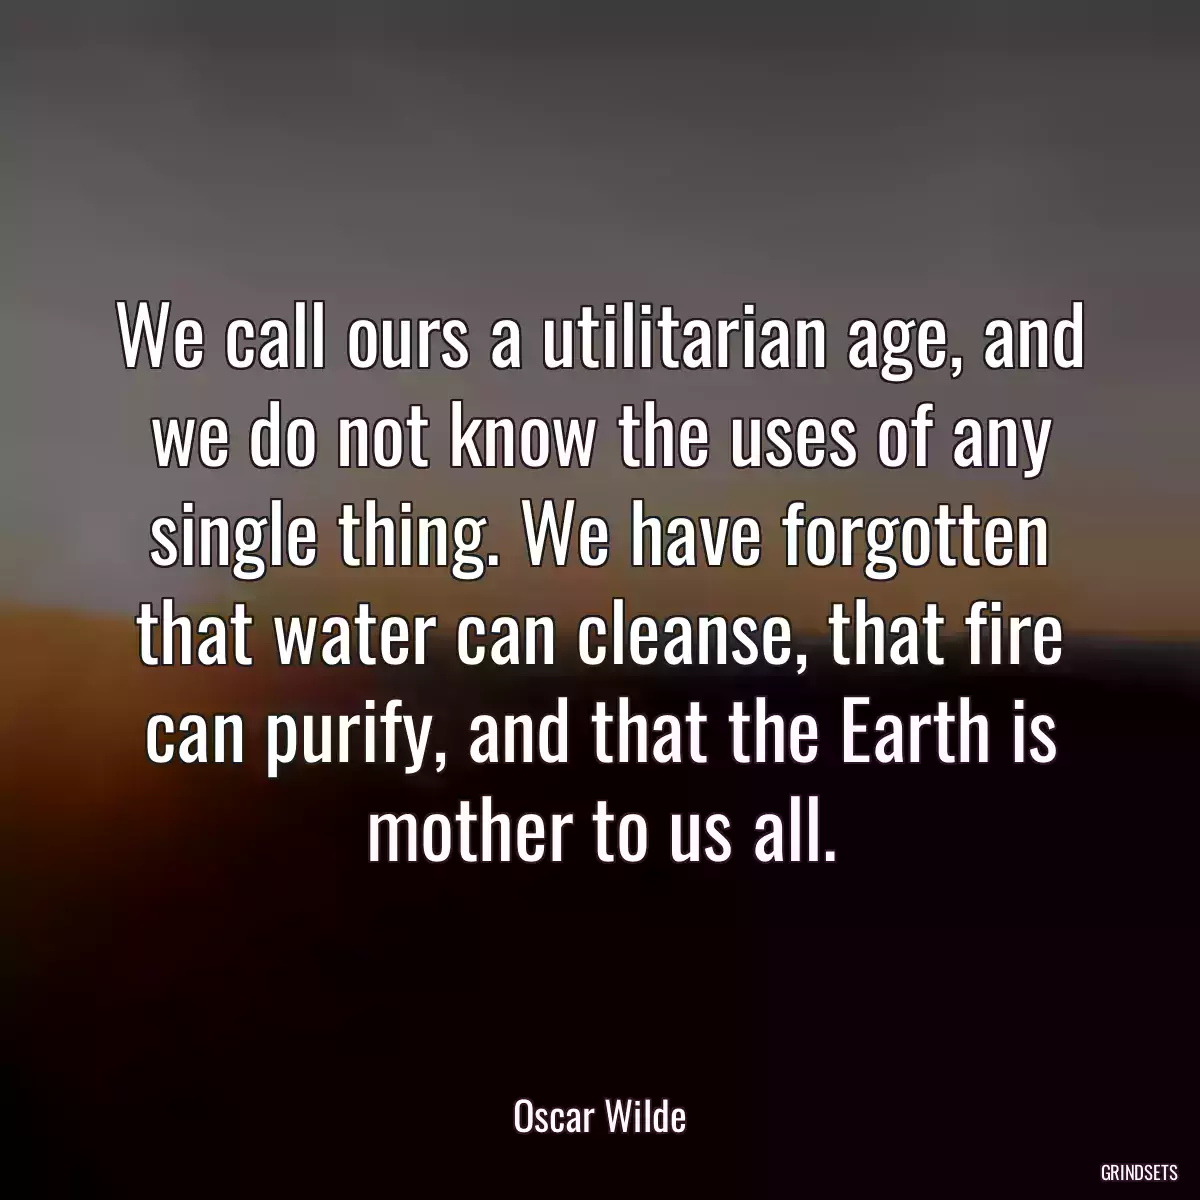 We call ours a utilitarian age, and we do not know the uses of any single thing. We have forgotten that water can cleanse, that fire can purify, and that the Earth is mother to us all.